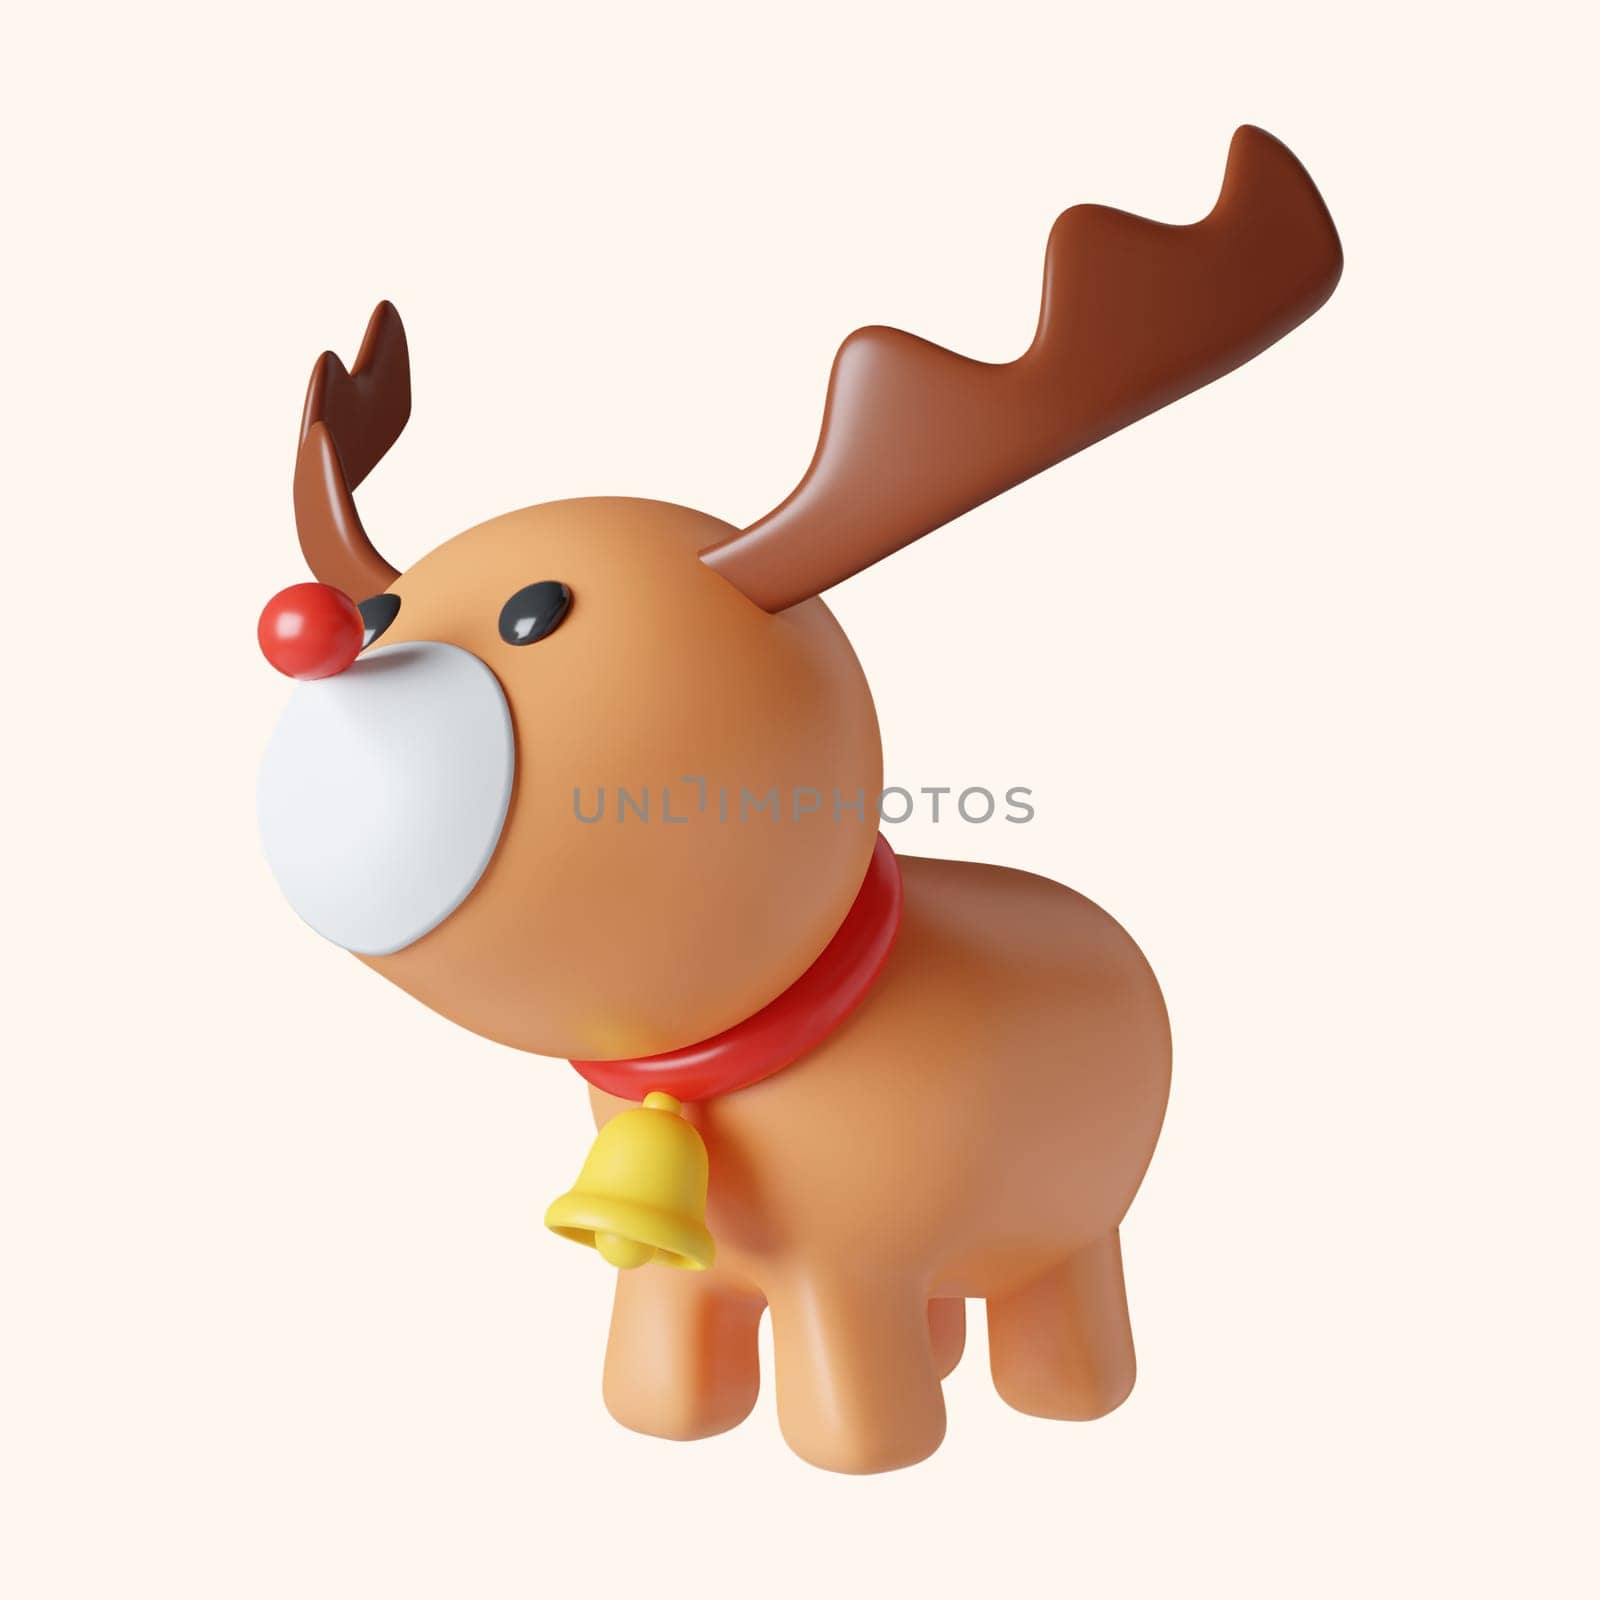 3d Christmas deer icon. minimal decorative festive conical shape tree. New Year's holiday decor. 3d design element In cartoon style. Icon isolated on white background. 3D illustration by meepiangraphic